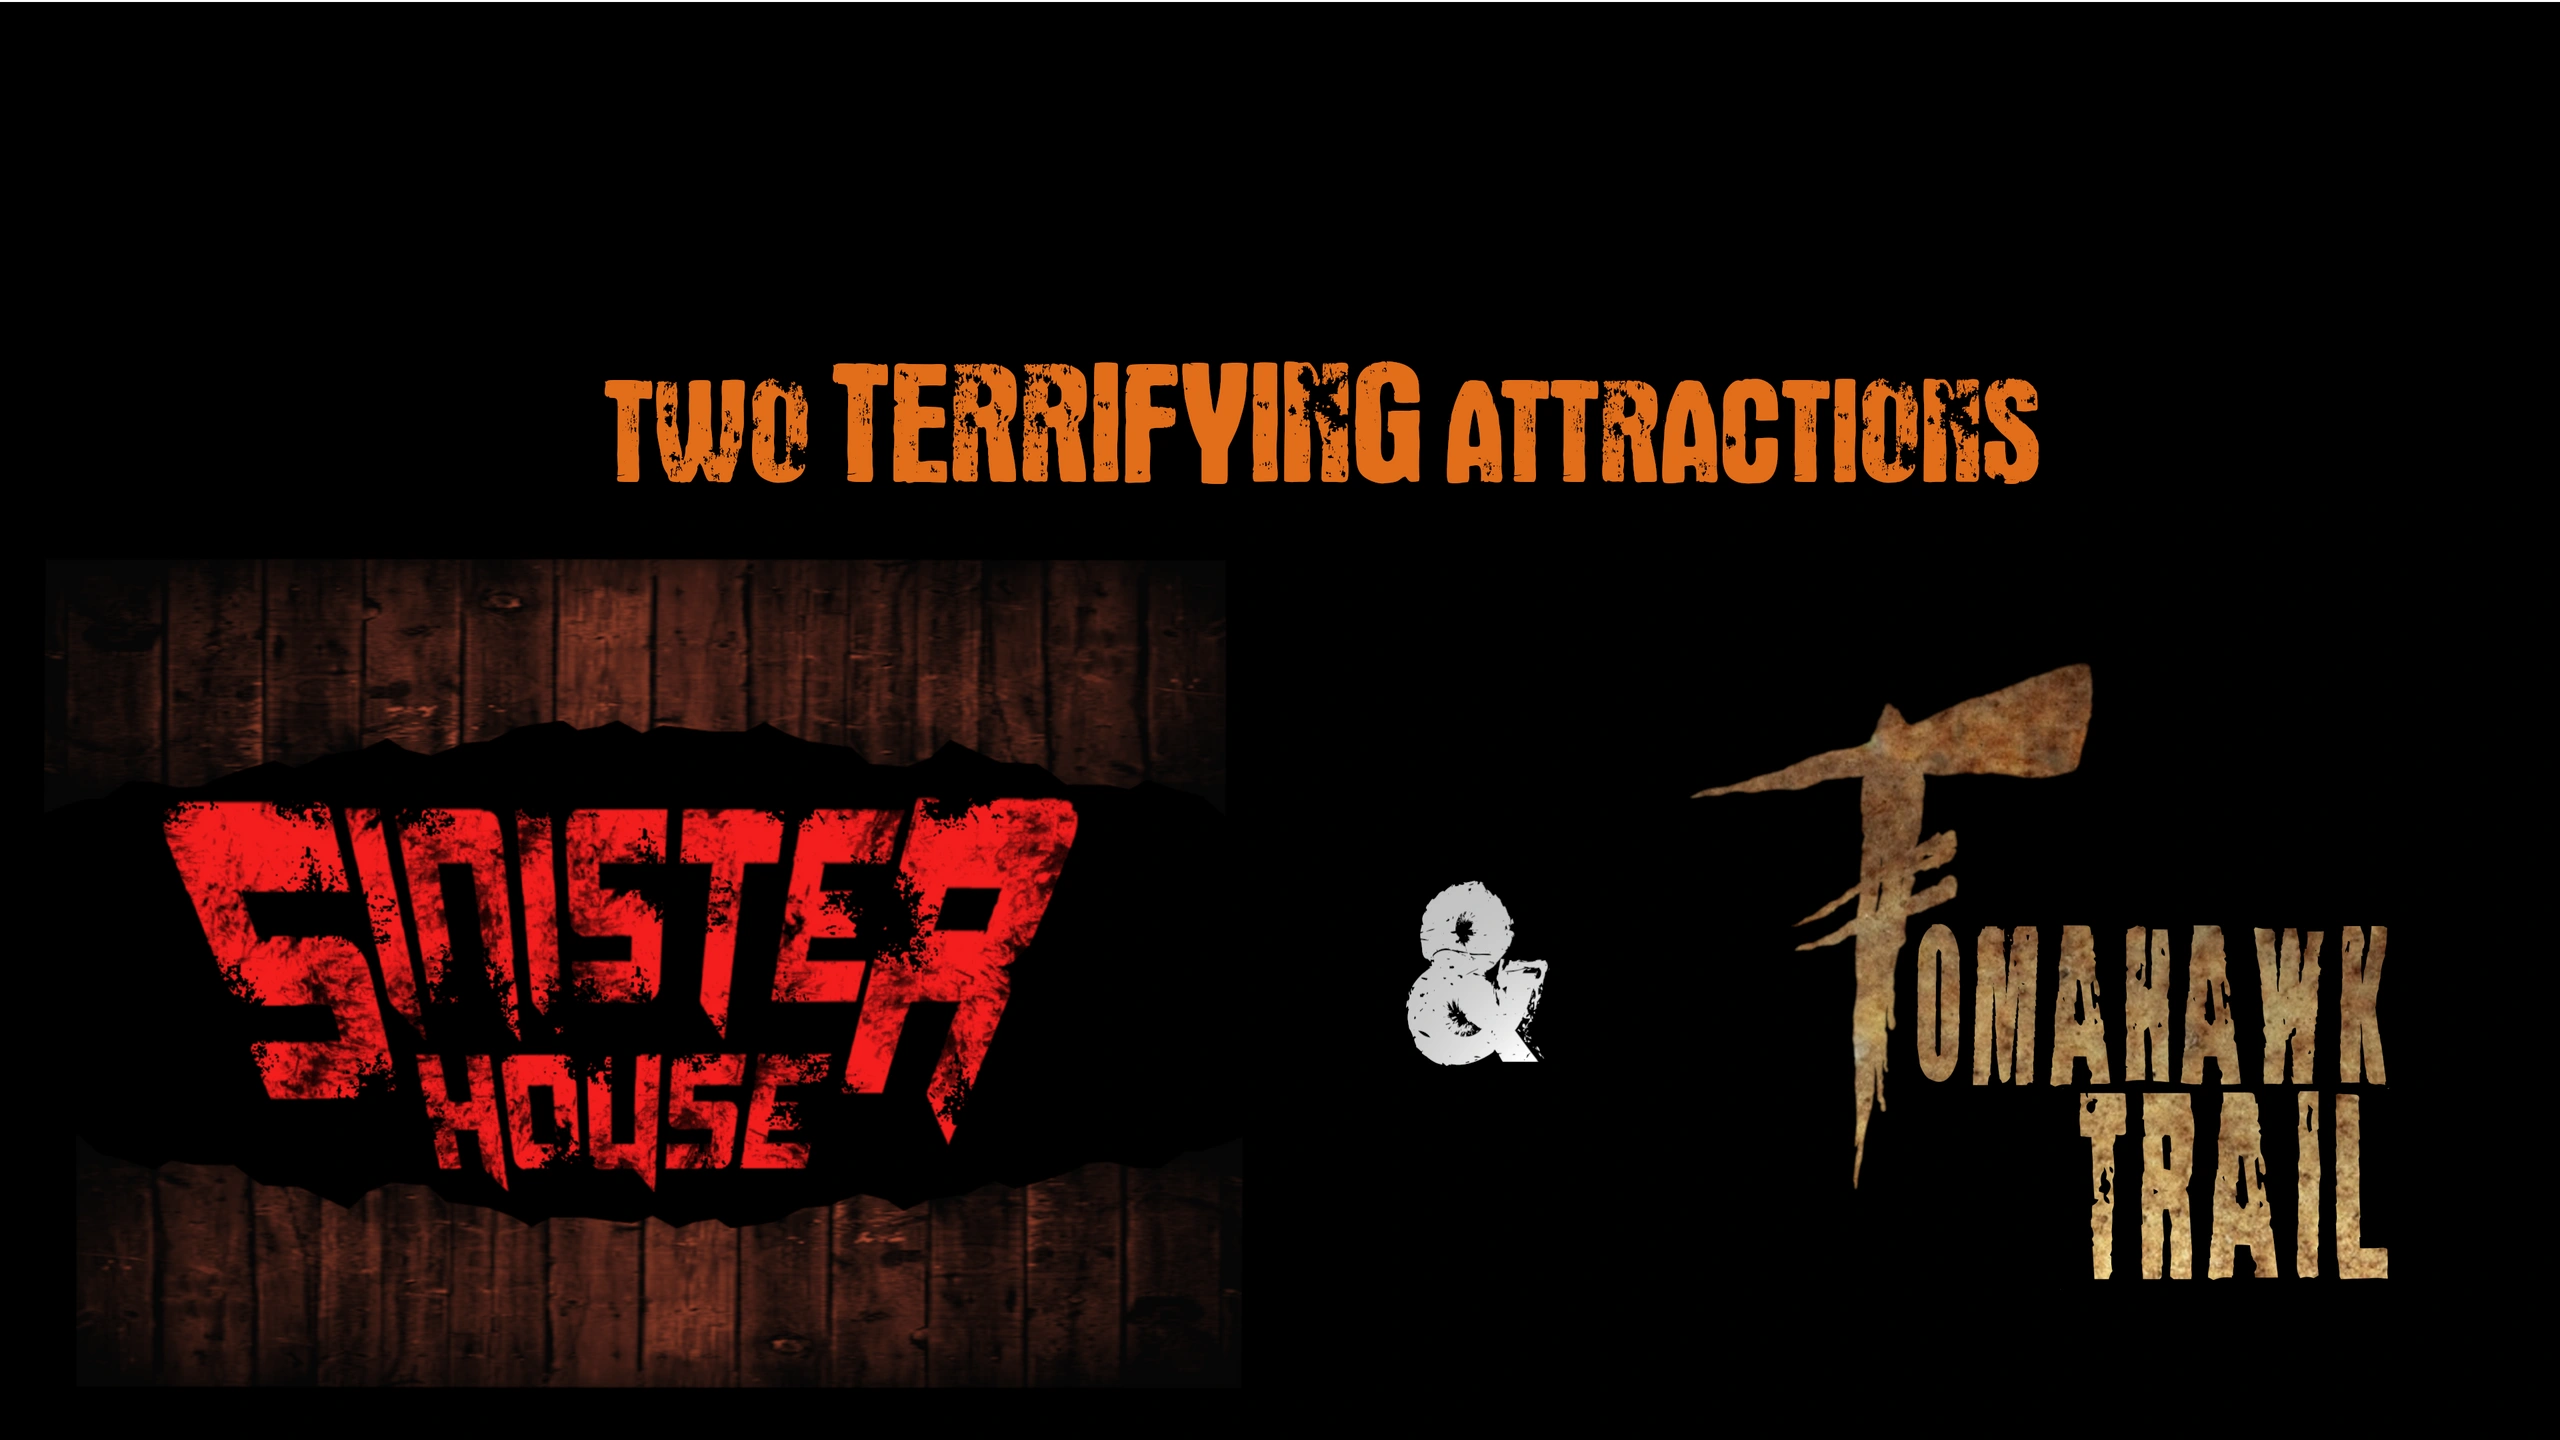 Sinister Acres in Southern Illinois is the best haunted attraction with two haunted houses